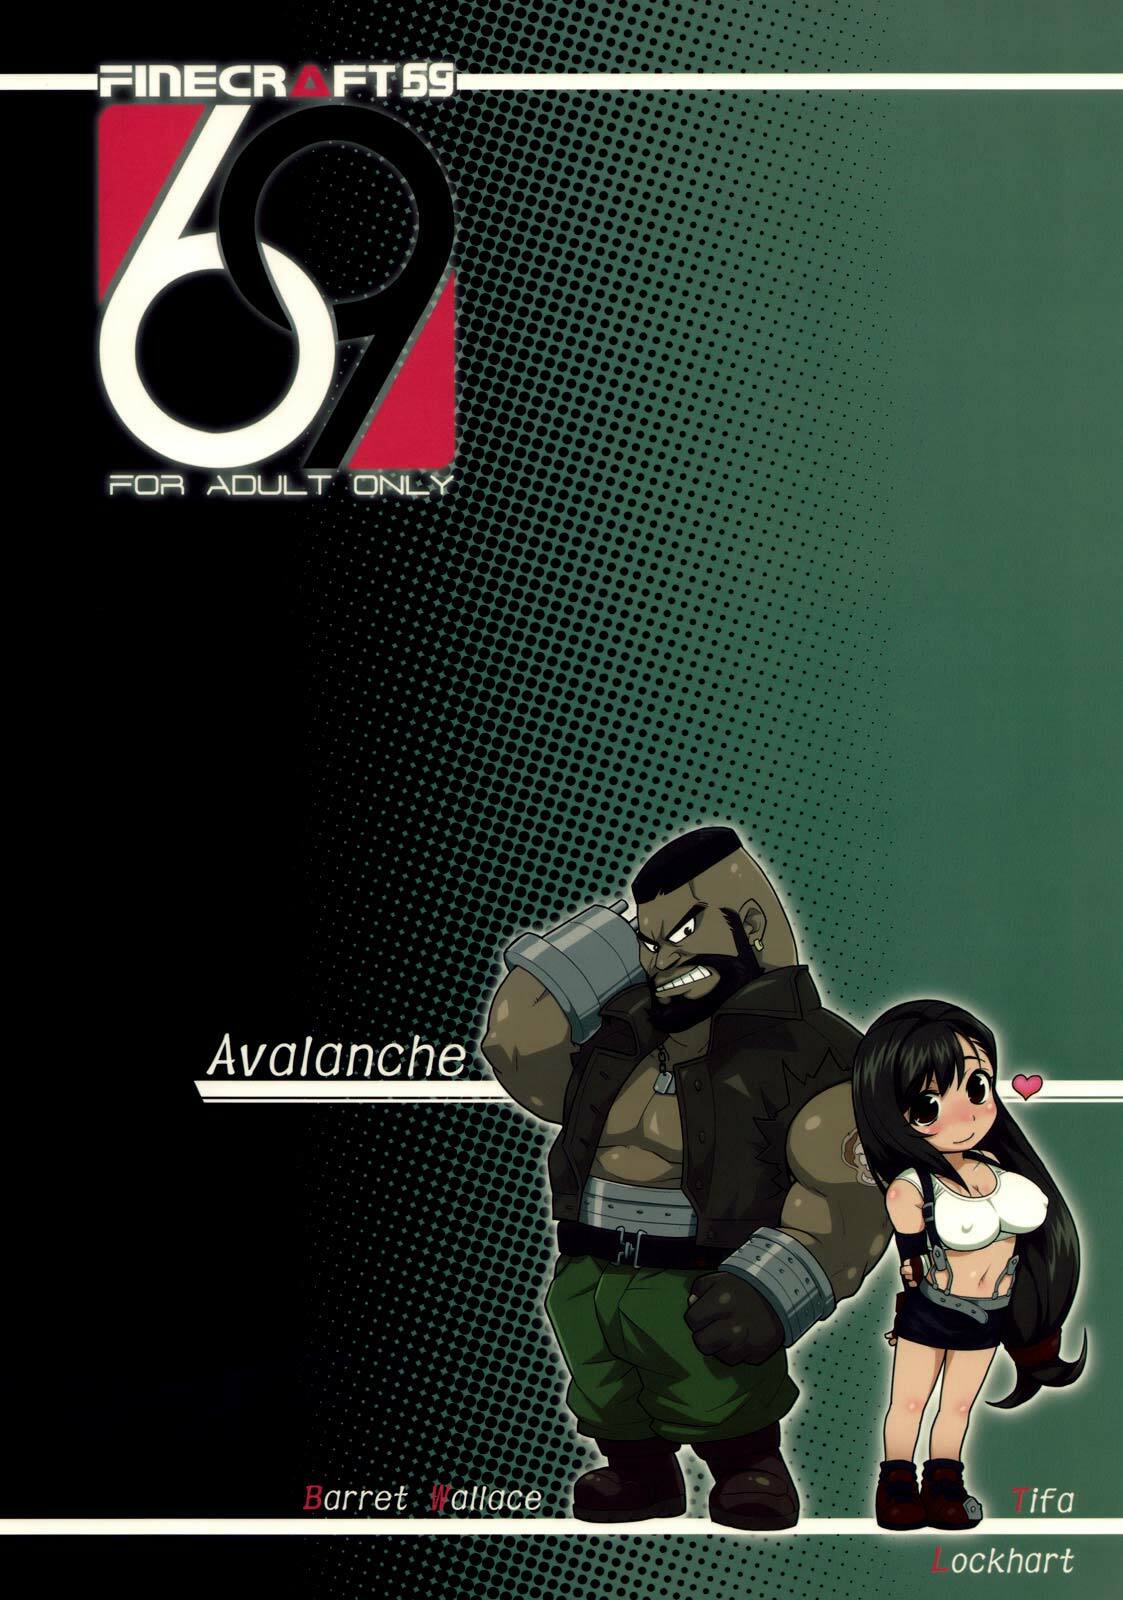 (C76) [Finecraft69 (6ro-)] Erotifa 7 Unlimited (Final Fantasy VII) [French] [O-S] page 26 full